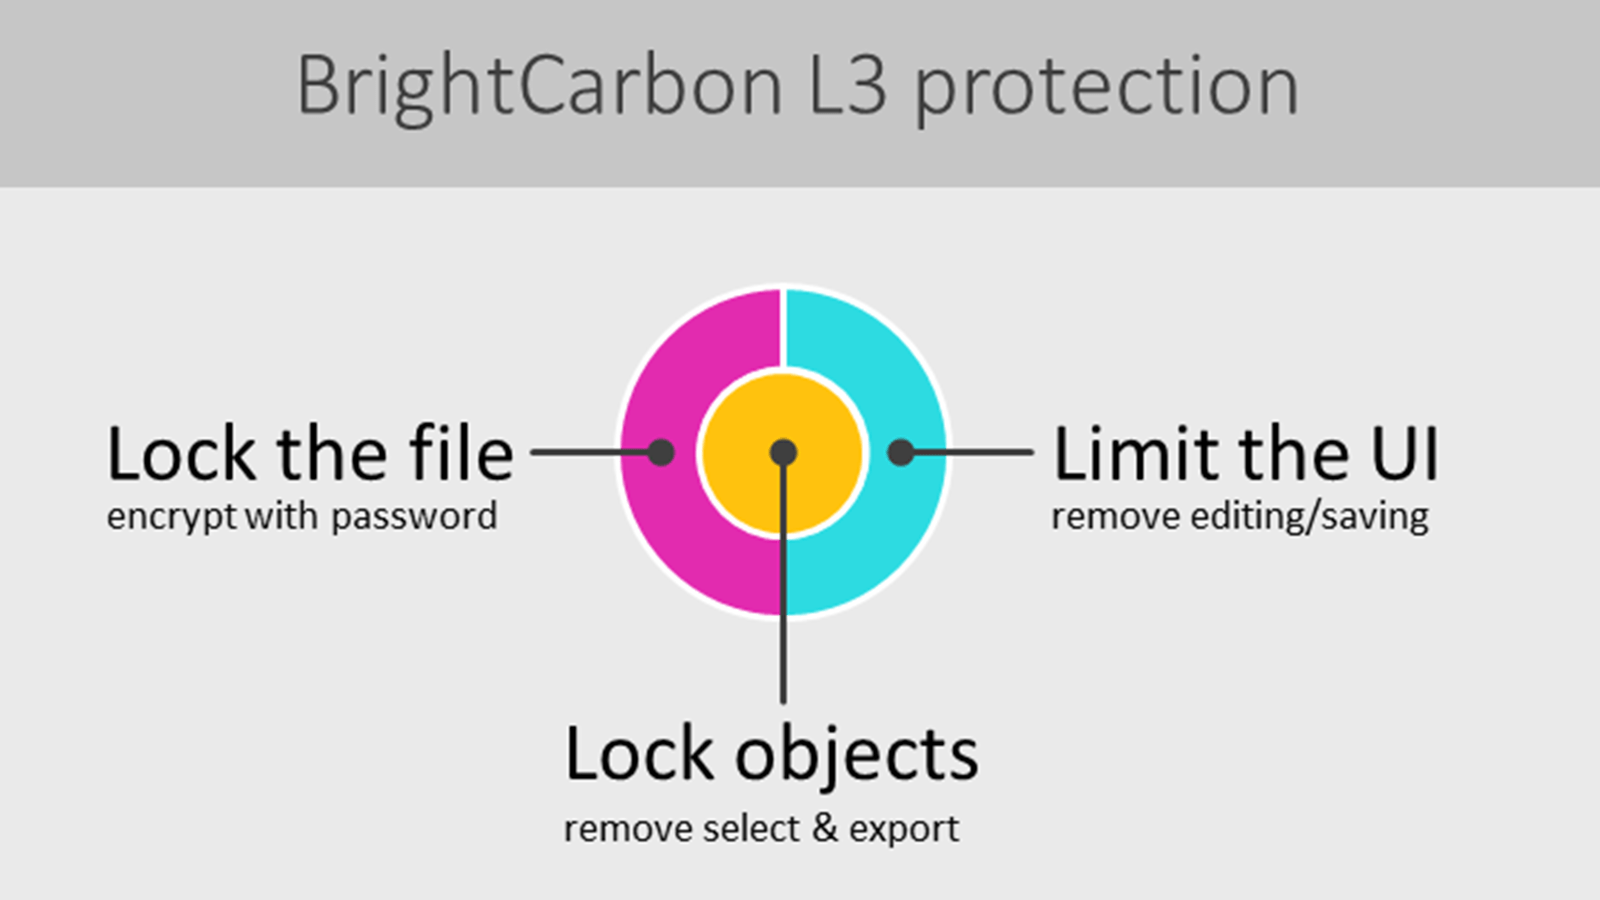 Title: BrightCarbon L3 protection. Beneath the title there is a circular graphic, it has 3 sections and is labelled Lock the file (encrypt with password) Lock objects (remove select & export) Limit the UI (remove editing/saving)